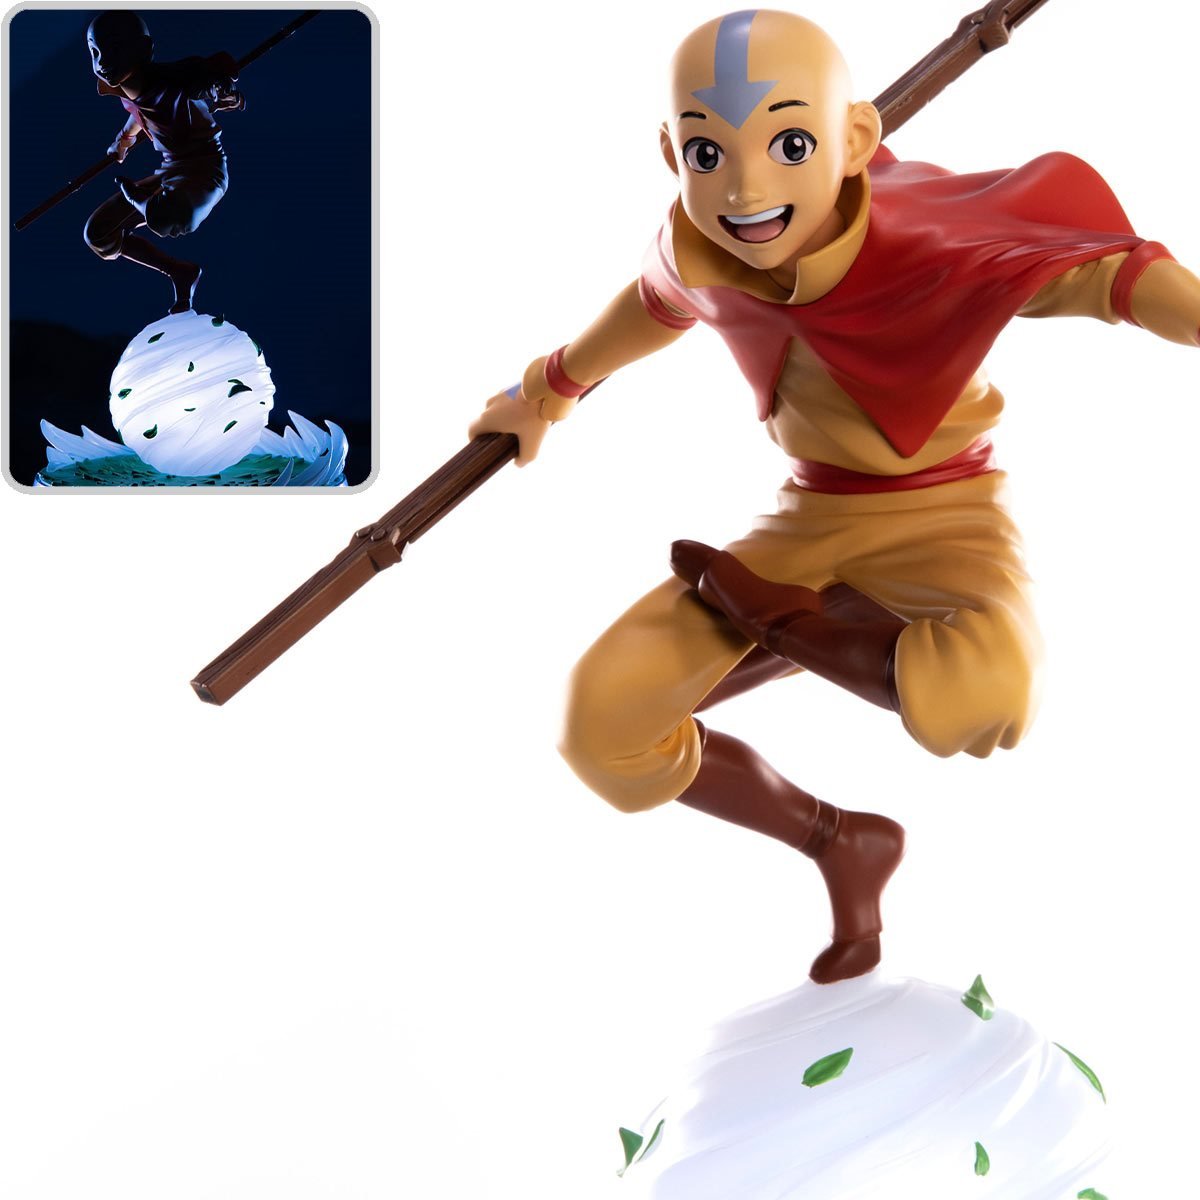 Avatar the last airbender KING BUMI 6 action figure Water Series in box